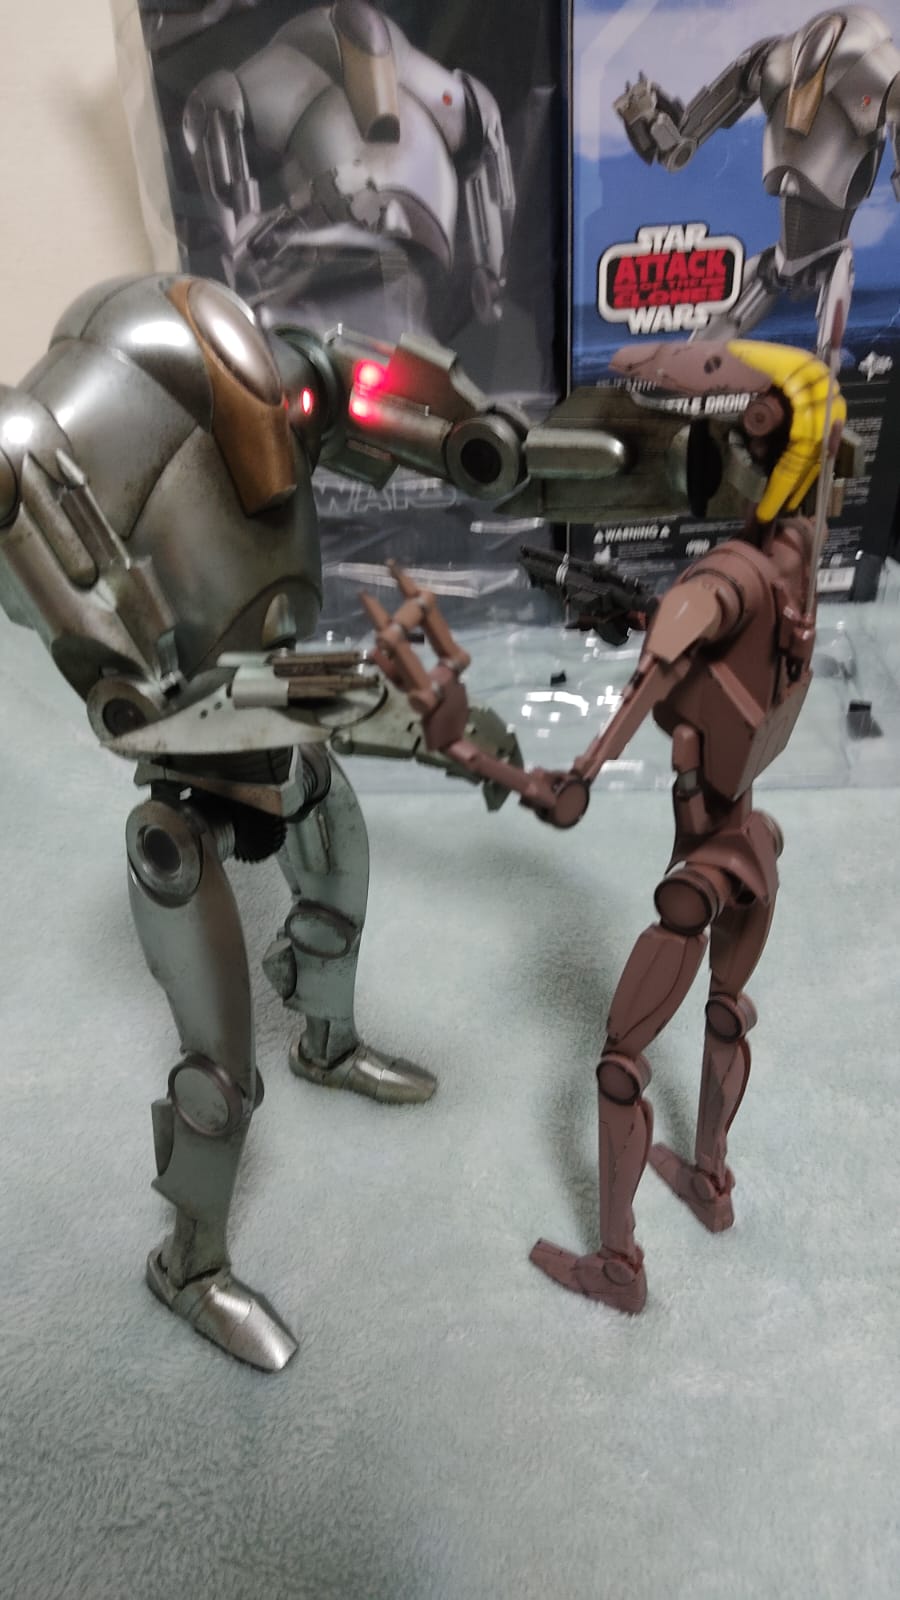 SuperBattleDroid - NEW PRODUCT: HOT TOYS: STAR WARS EPISODE II: ATTACK OF THE CLONES™ SUPER BATTLE DROID™ 1/6TH SCALE COLLECTIBLE FIGURE Whats168